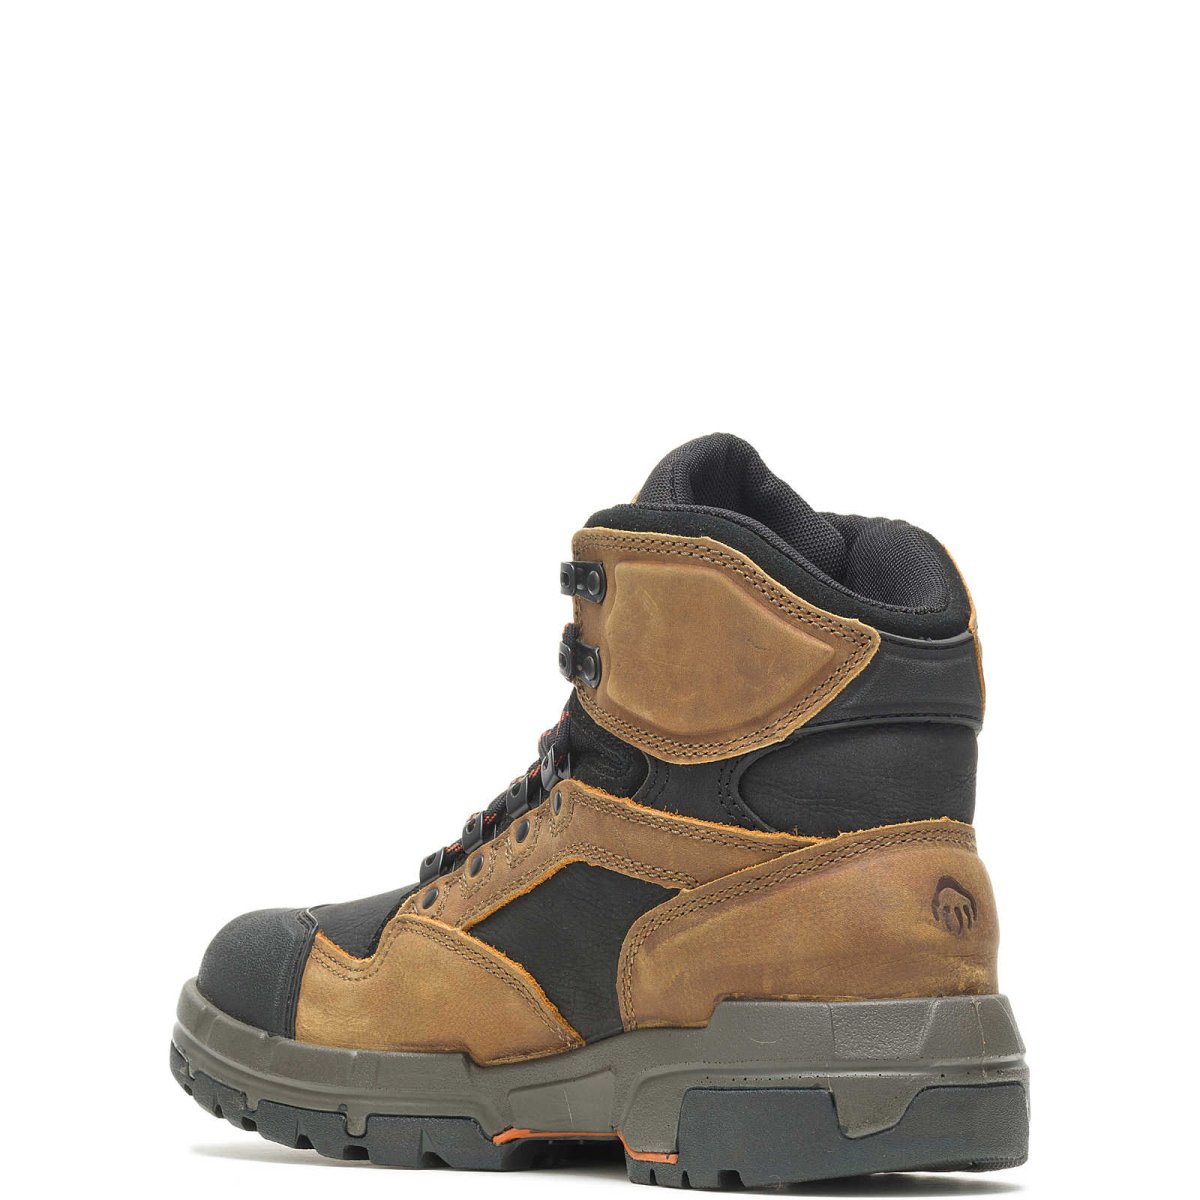 WOLVERINE LEGEND DURASHOCKS CARBONMAX 6" SAFETY TOE MEN'S WORK BOOT (W10611) IN TAN - TLW Shoes